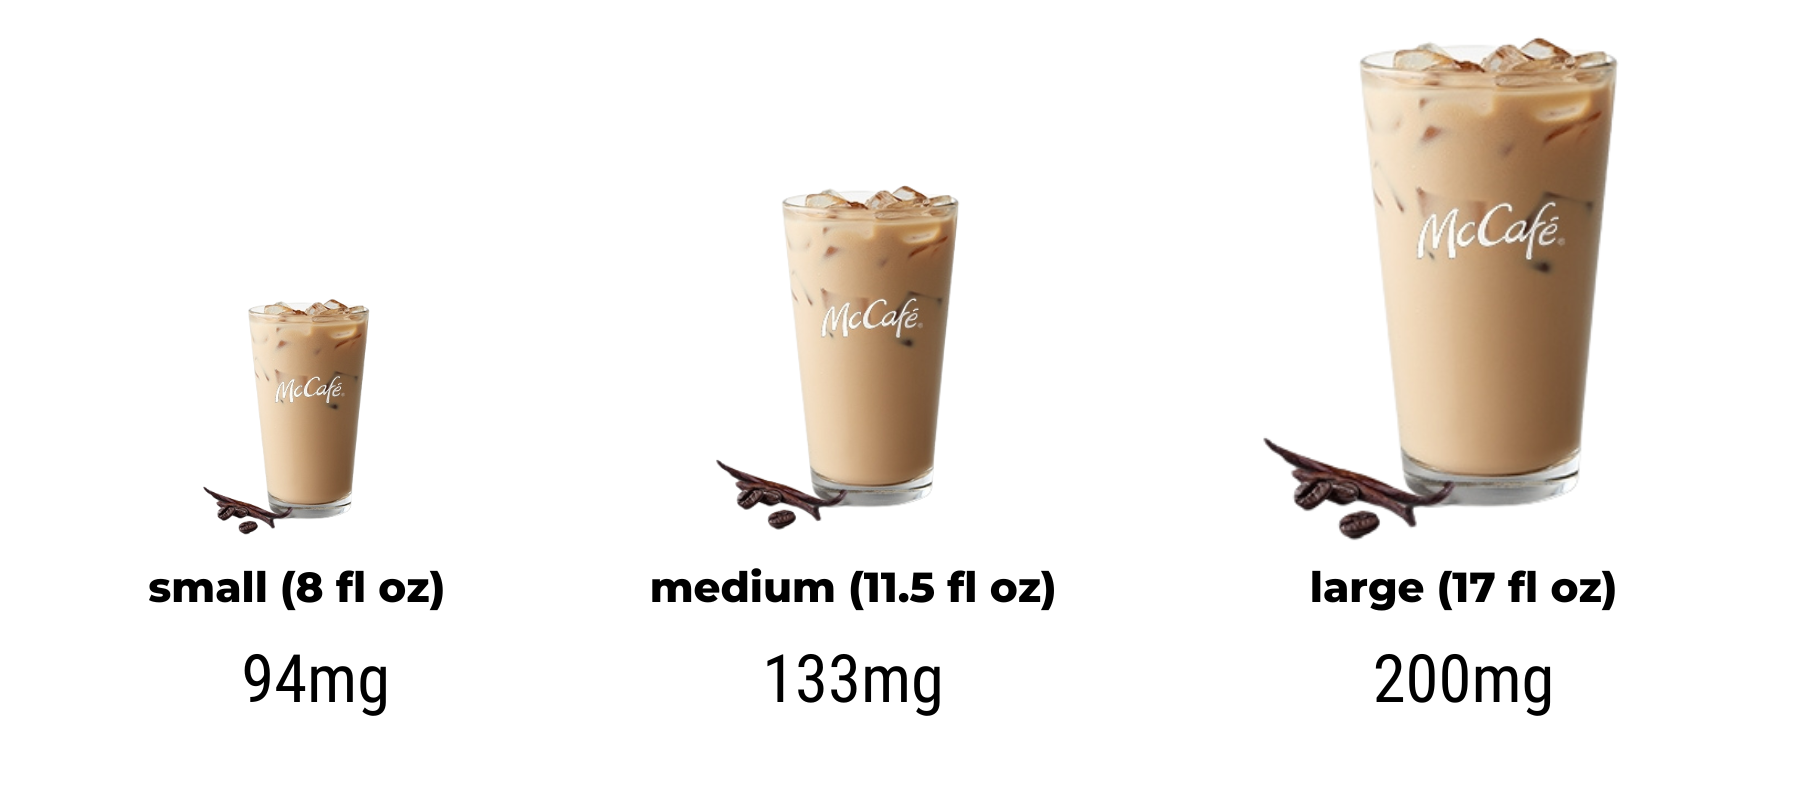 Here's how much caffeine is in McDonalds iced coffee